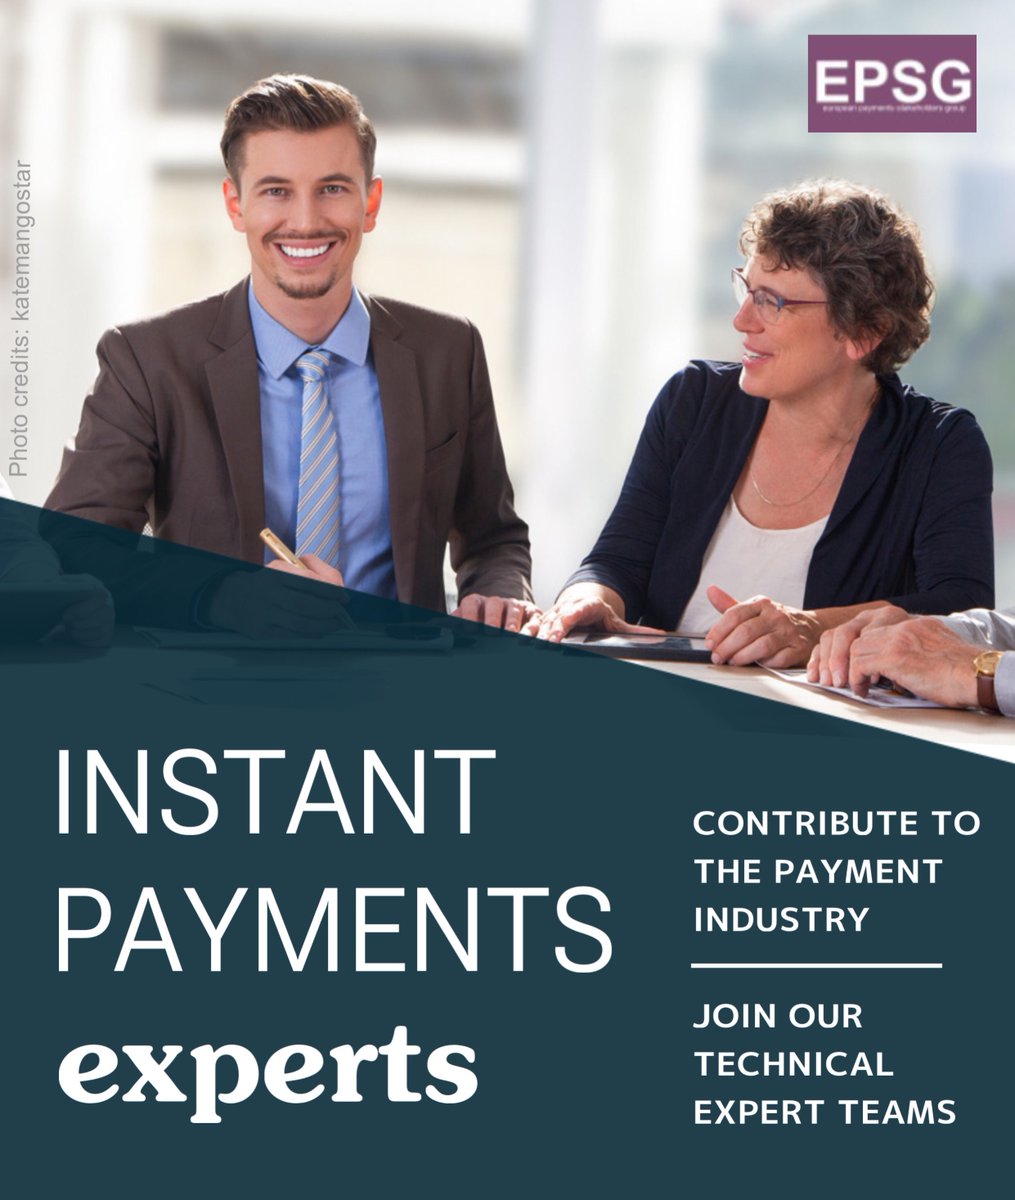 We are looking for #instantpayments #experts among our Members to broaden expertise in our working groups. Help us spread the news with your colleagues and encourage them to apply. 
They have time until 29 December for that. 
#paymentindustry #standardisation